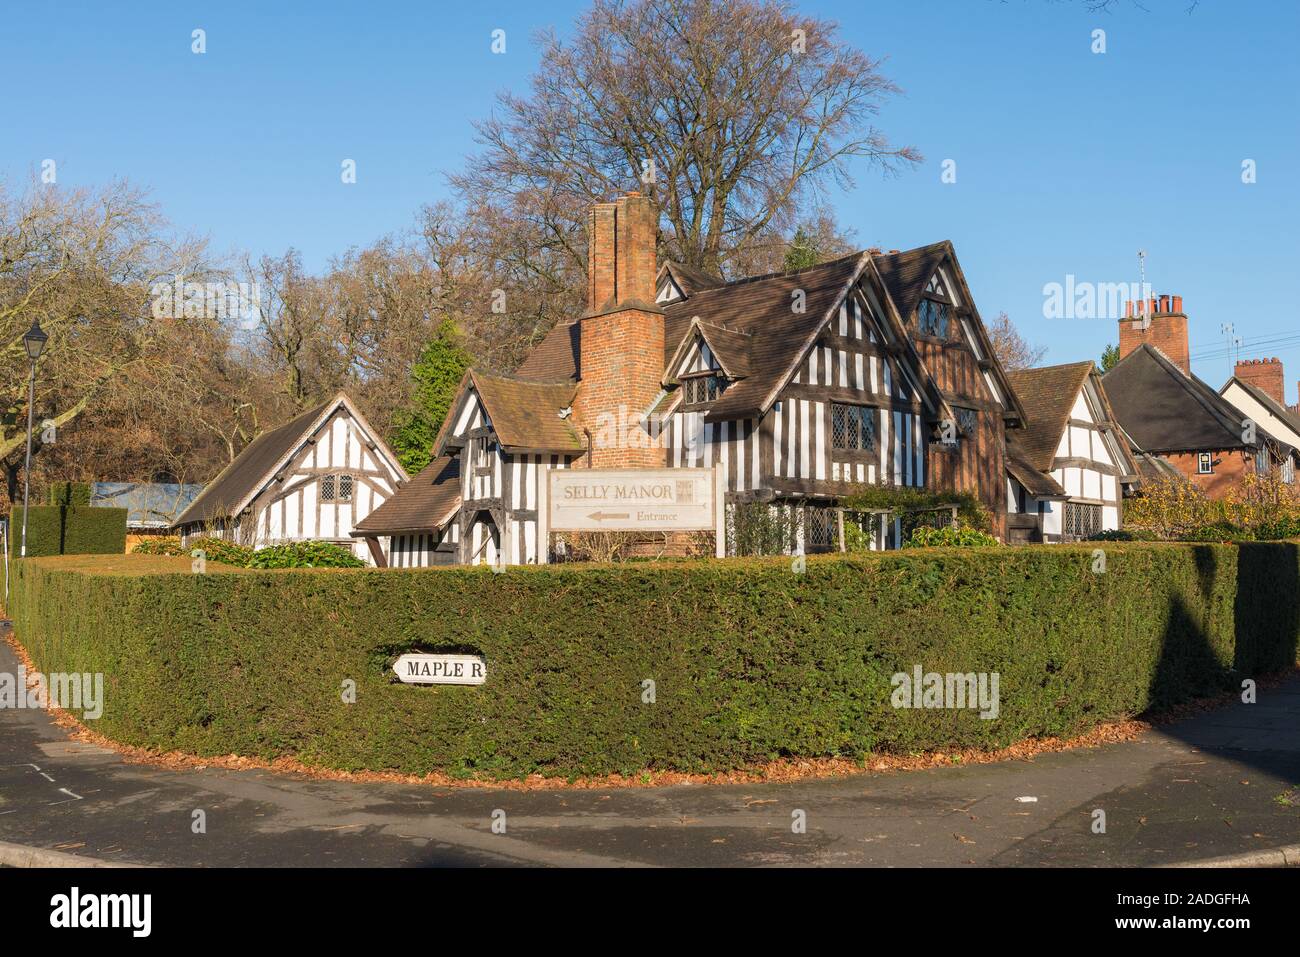 Selly Manor Museum has been a museum since 1916 in Selly Manor which dates from medieval times in Bournville, Birmingham, UK Stock Photo